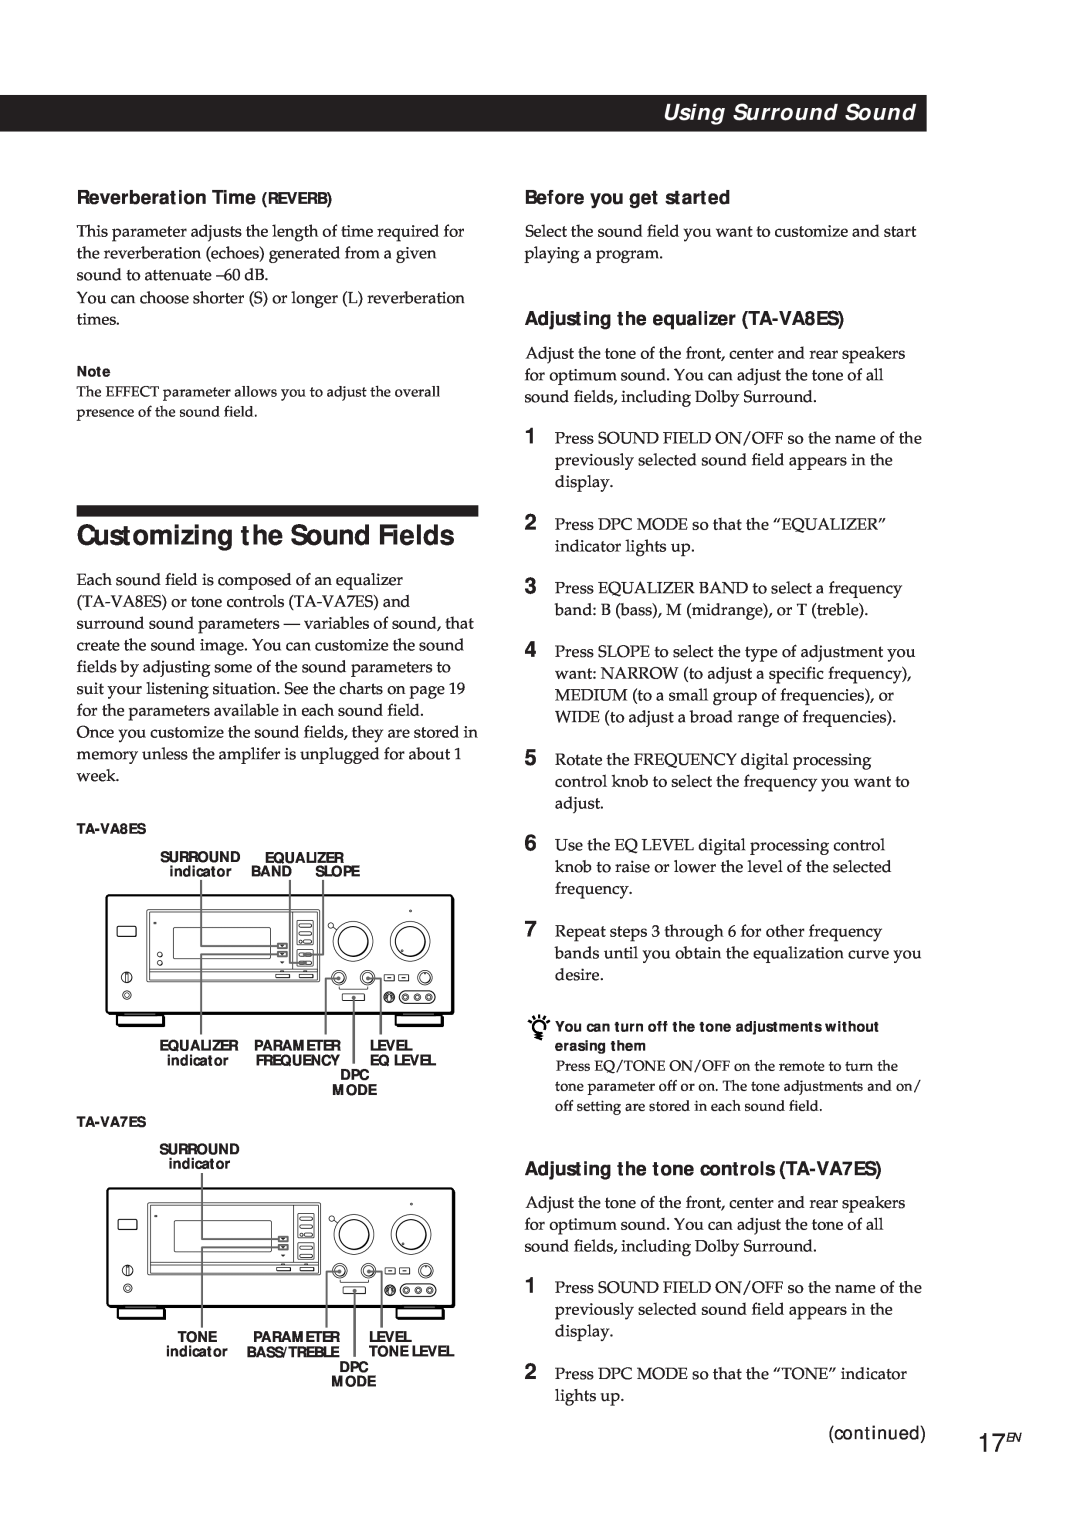 Sony manual Customizing the Sound Fields, Reverberation Time REVERB, Adjusting the equalizer TA-VA8ES, continued 17EN 